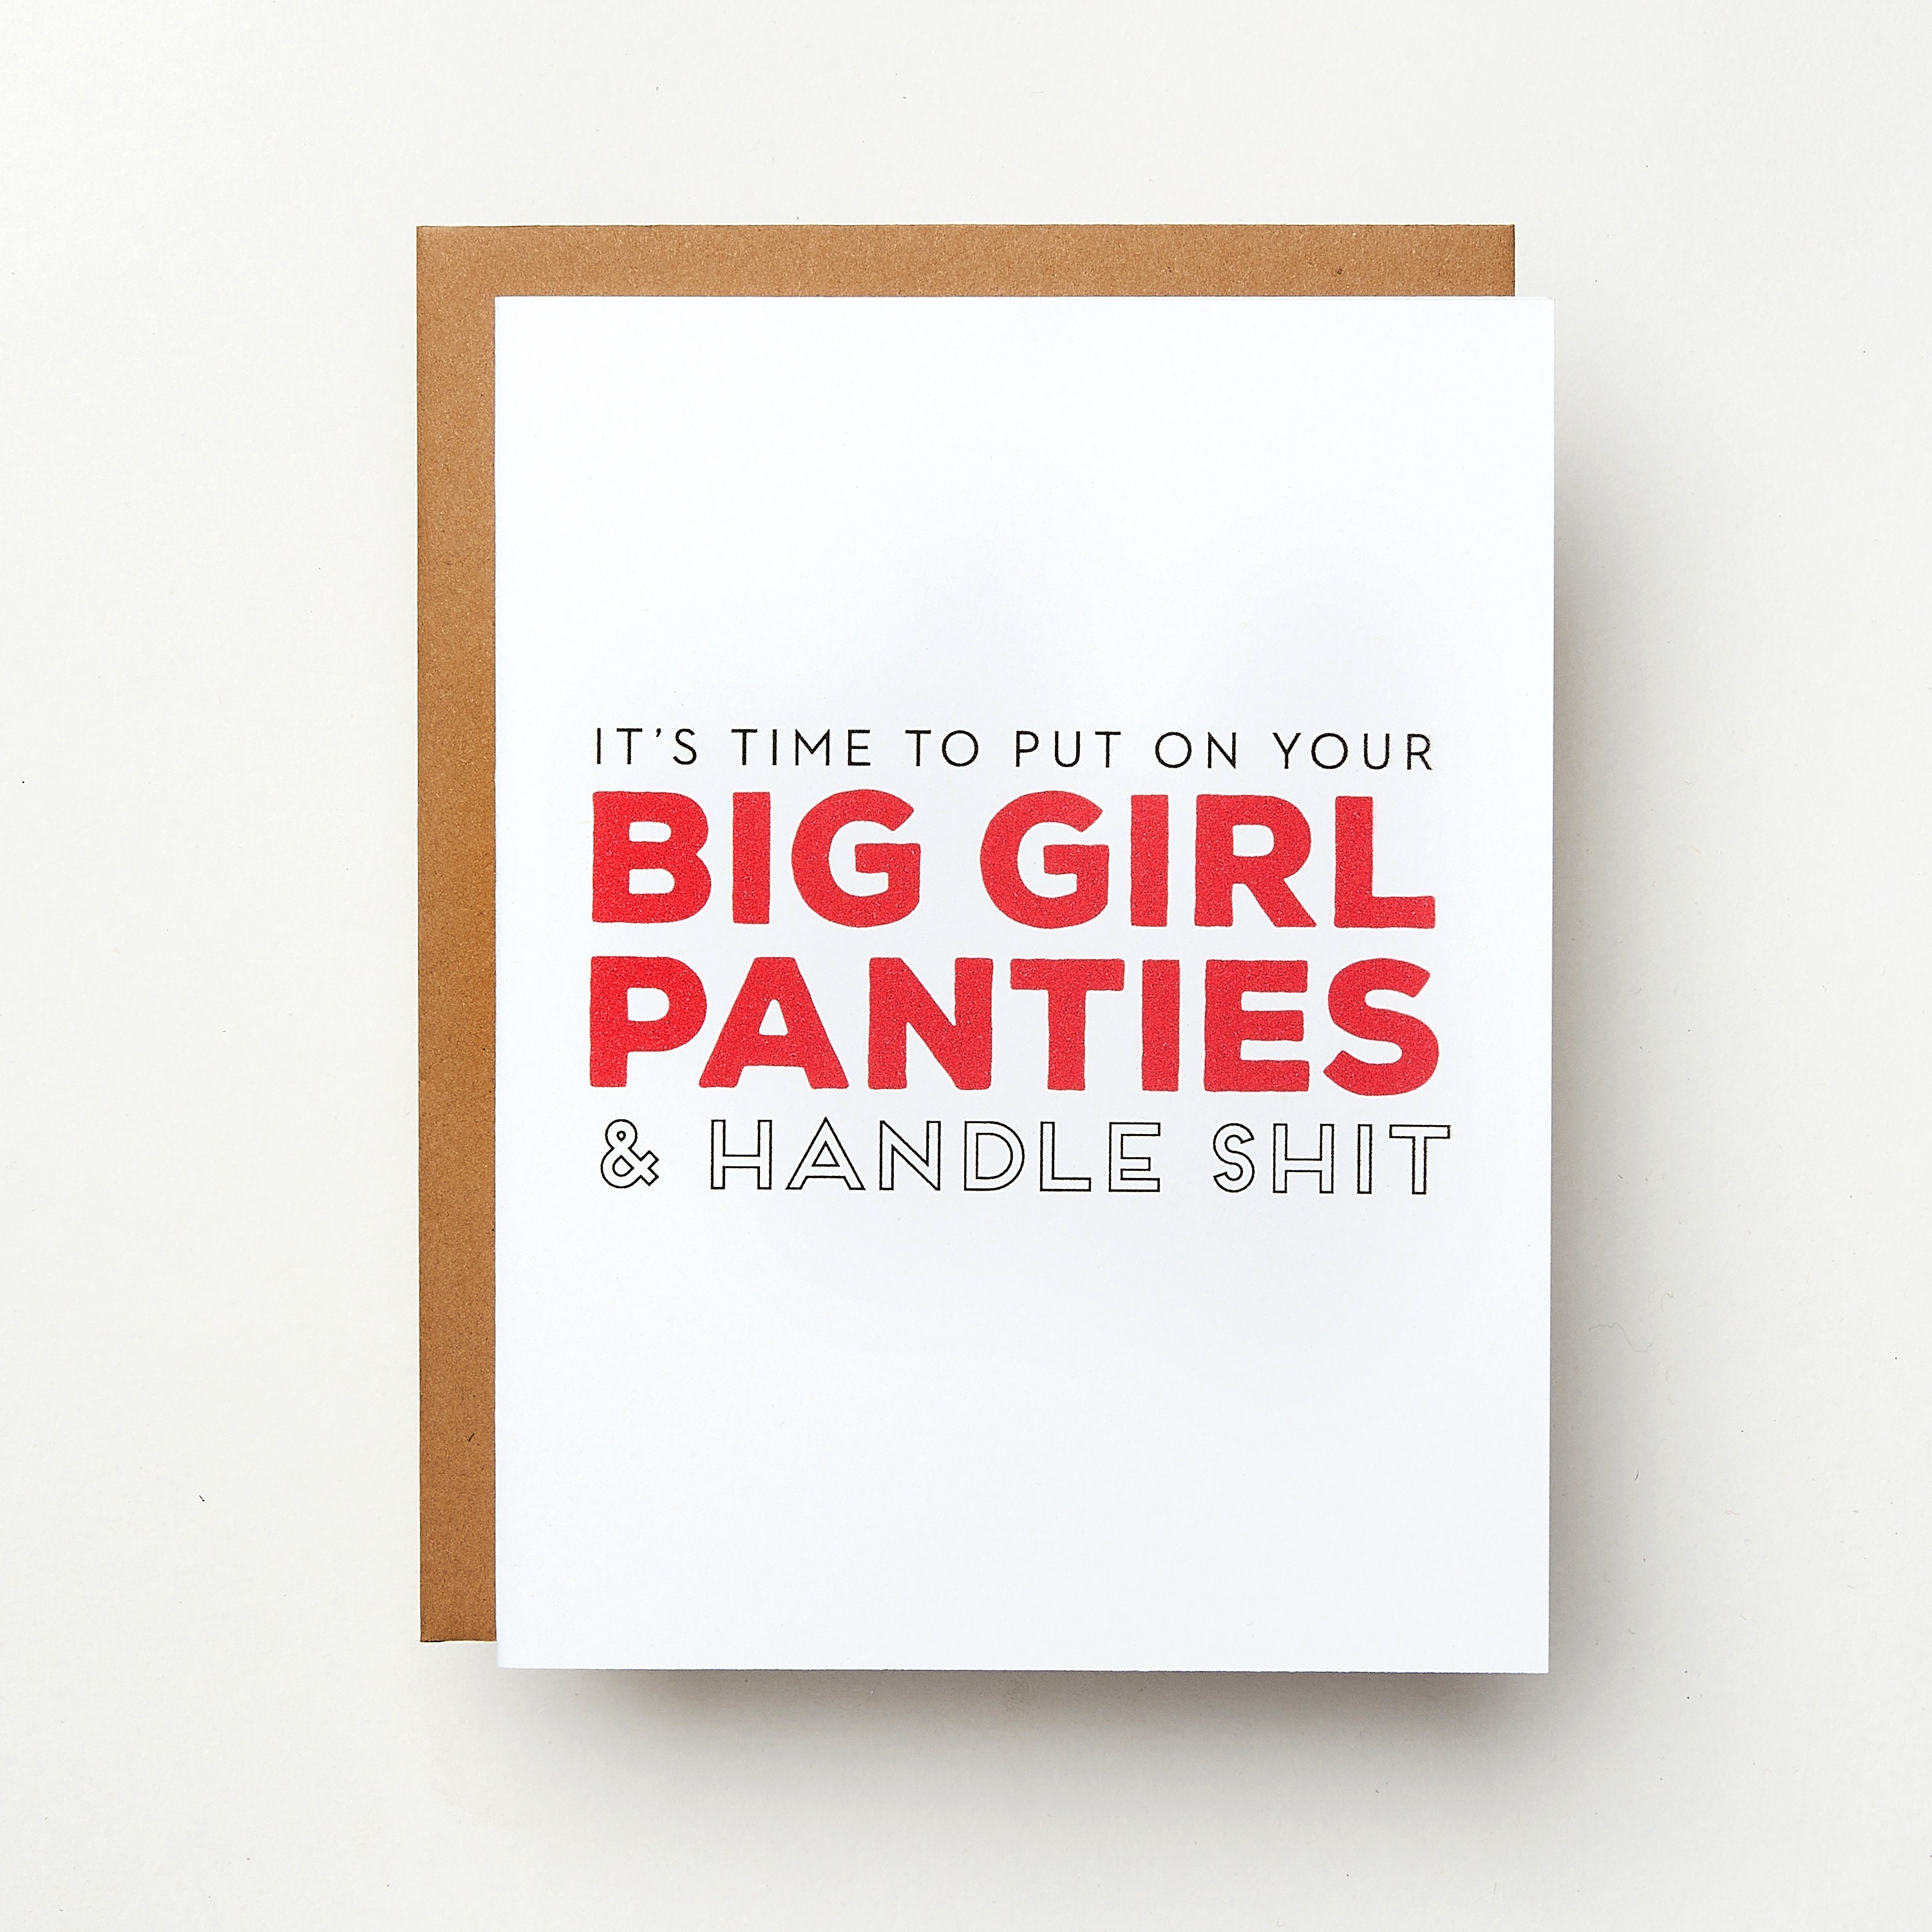 It's Time to Put on Your Big Girl Panties & Handle Shit Card Encouragement  Card Tough Times Funny Card Greeting Card -  Denmark